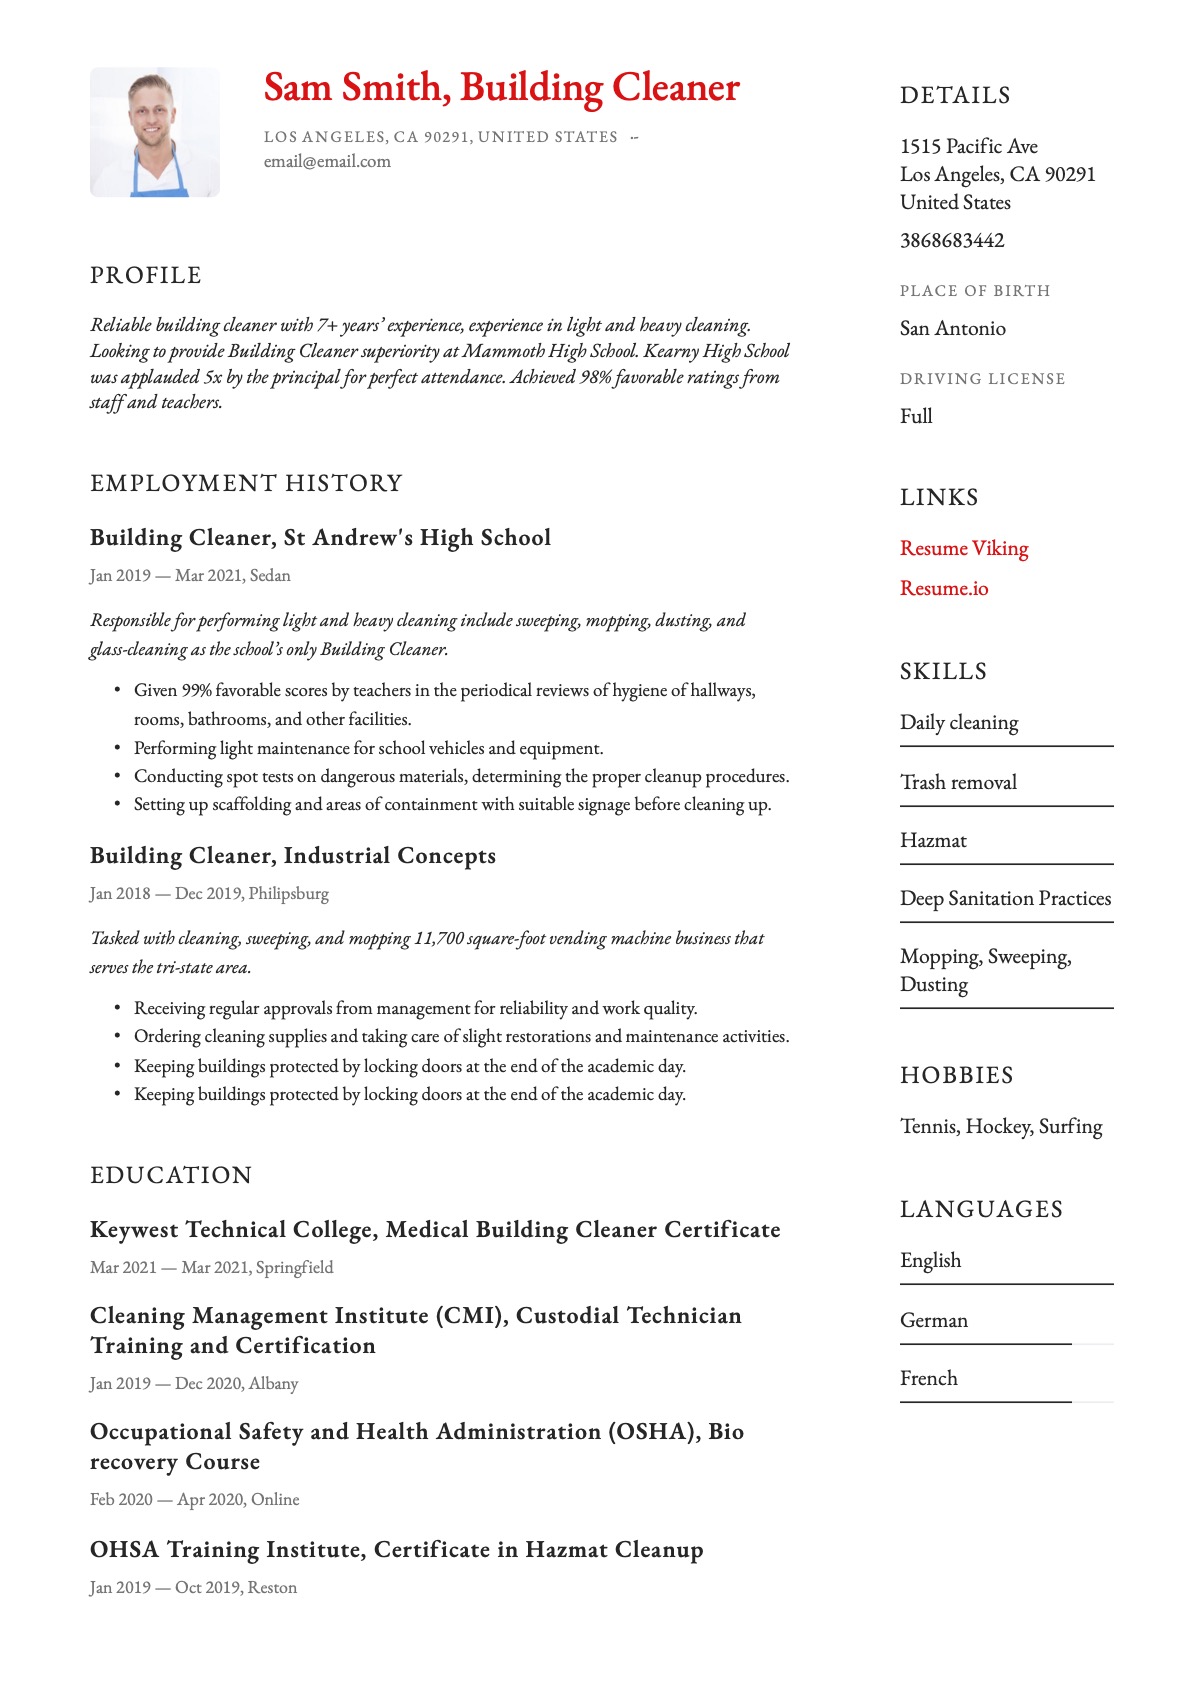 Example Resume Building Cleaner-13